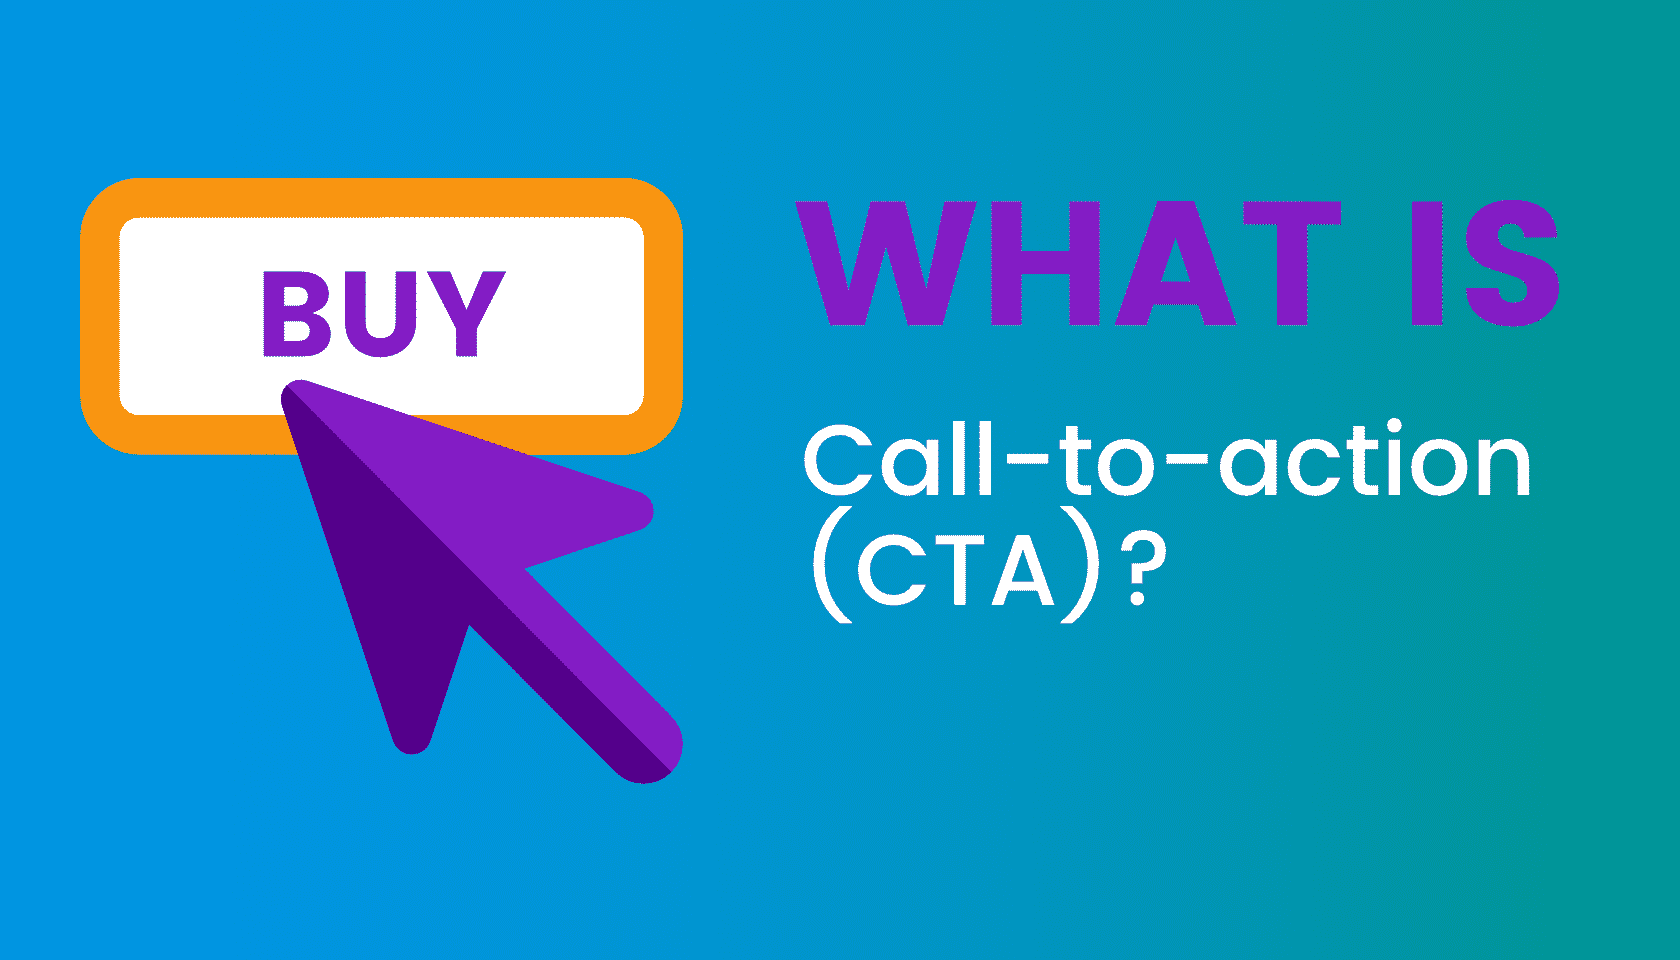 What is: Call-to-action (CTA)